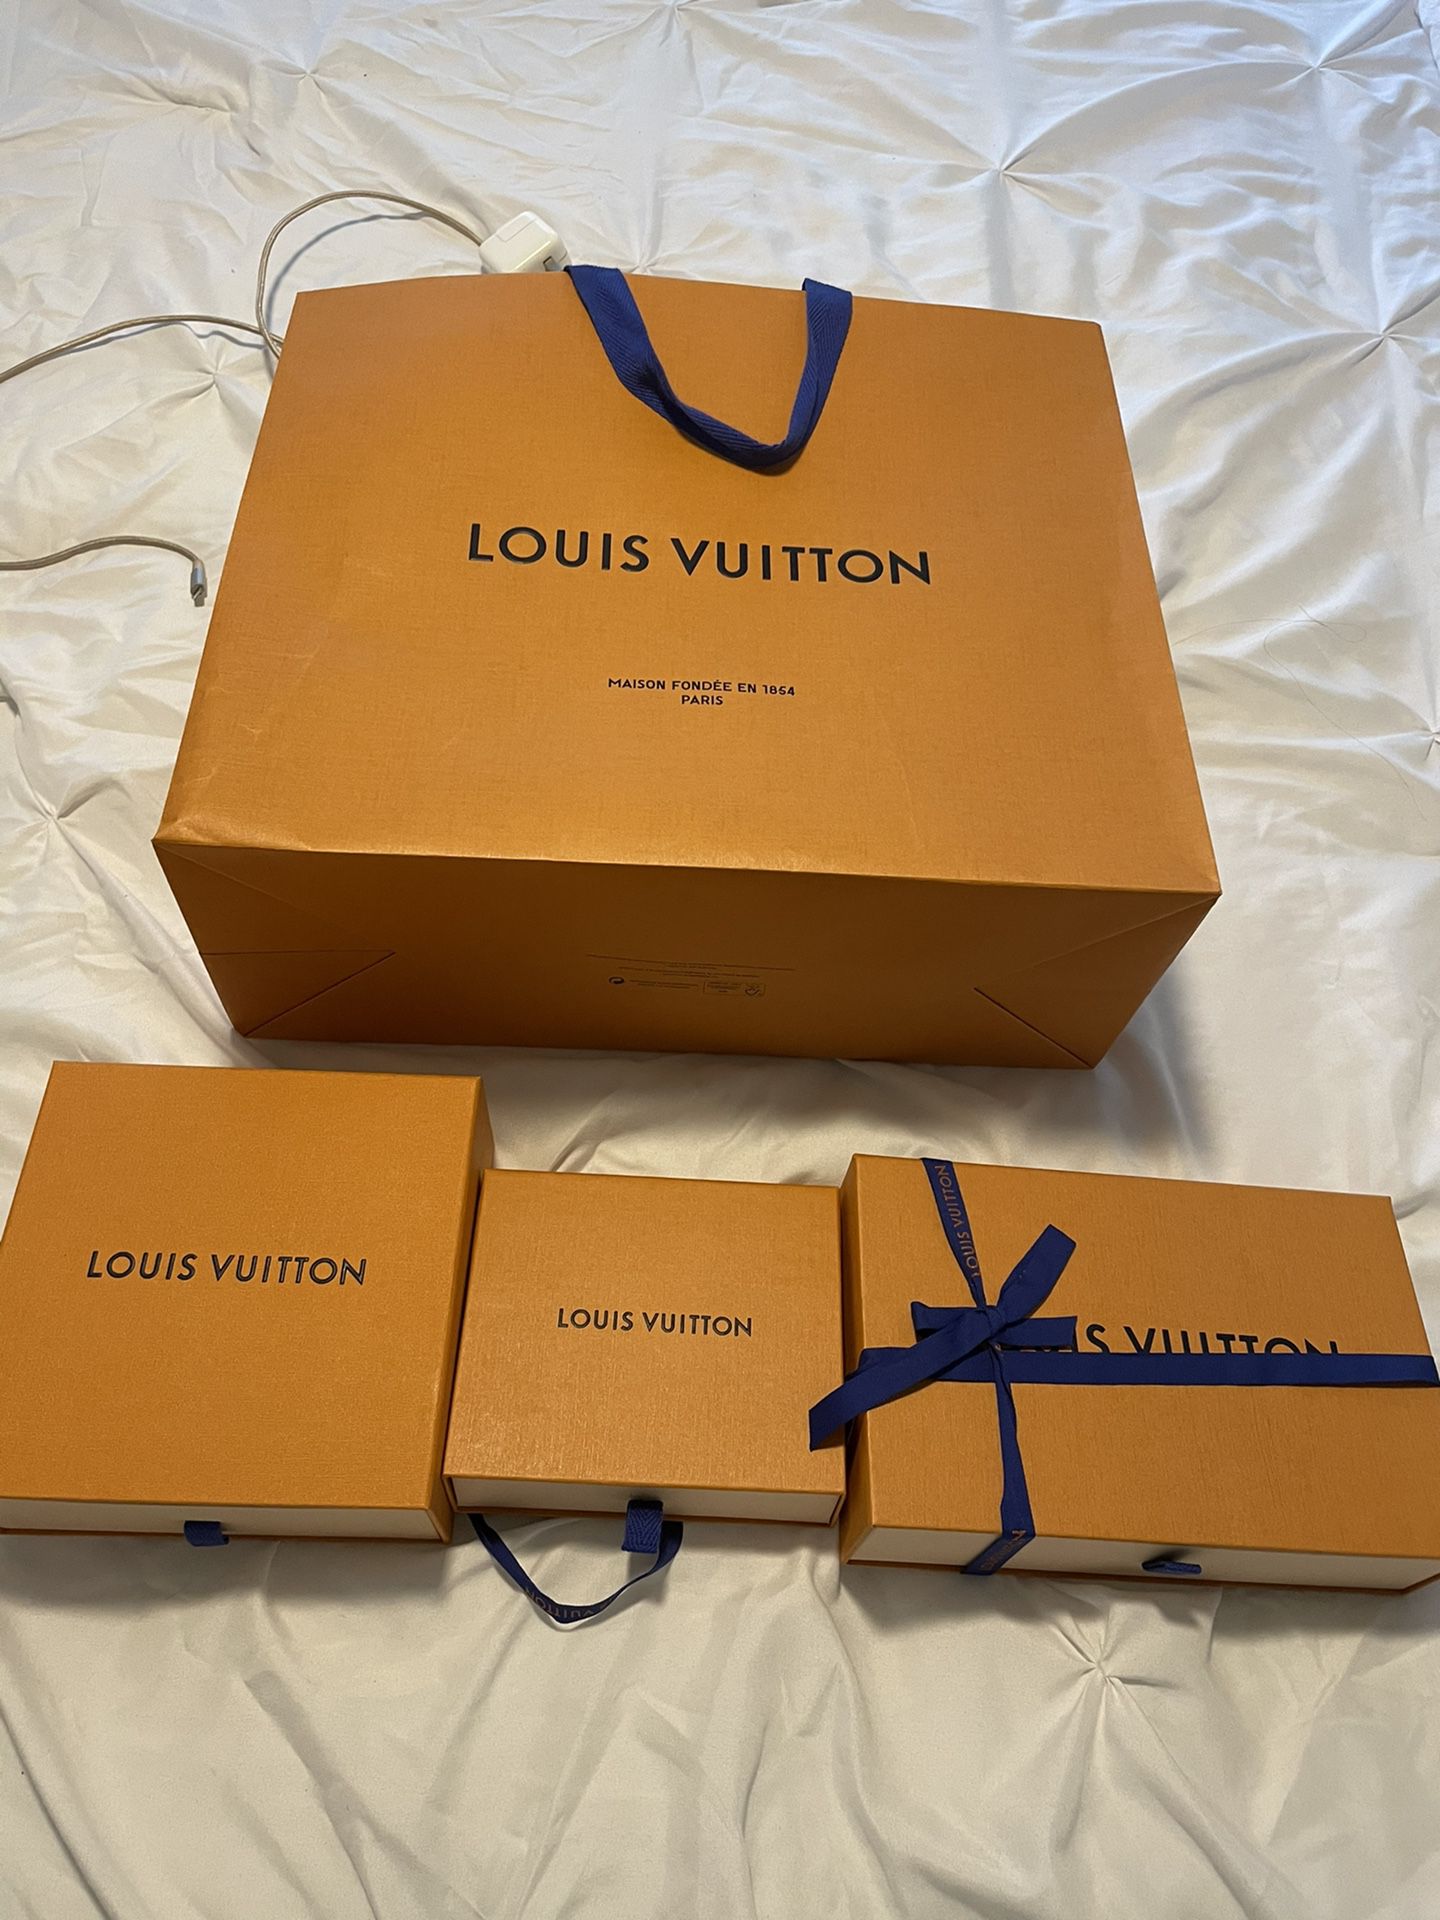 LV Boxes for Sale in Downey, CA - OfferUp